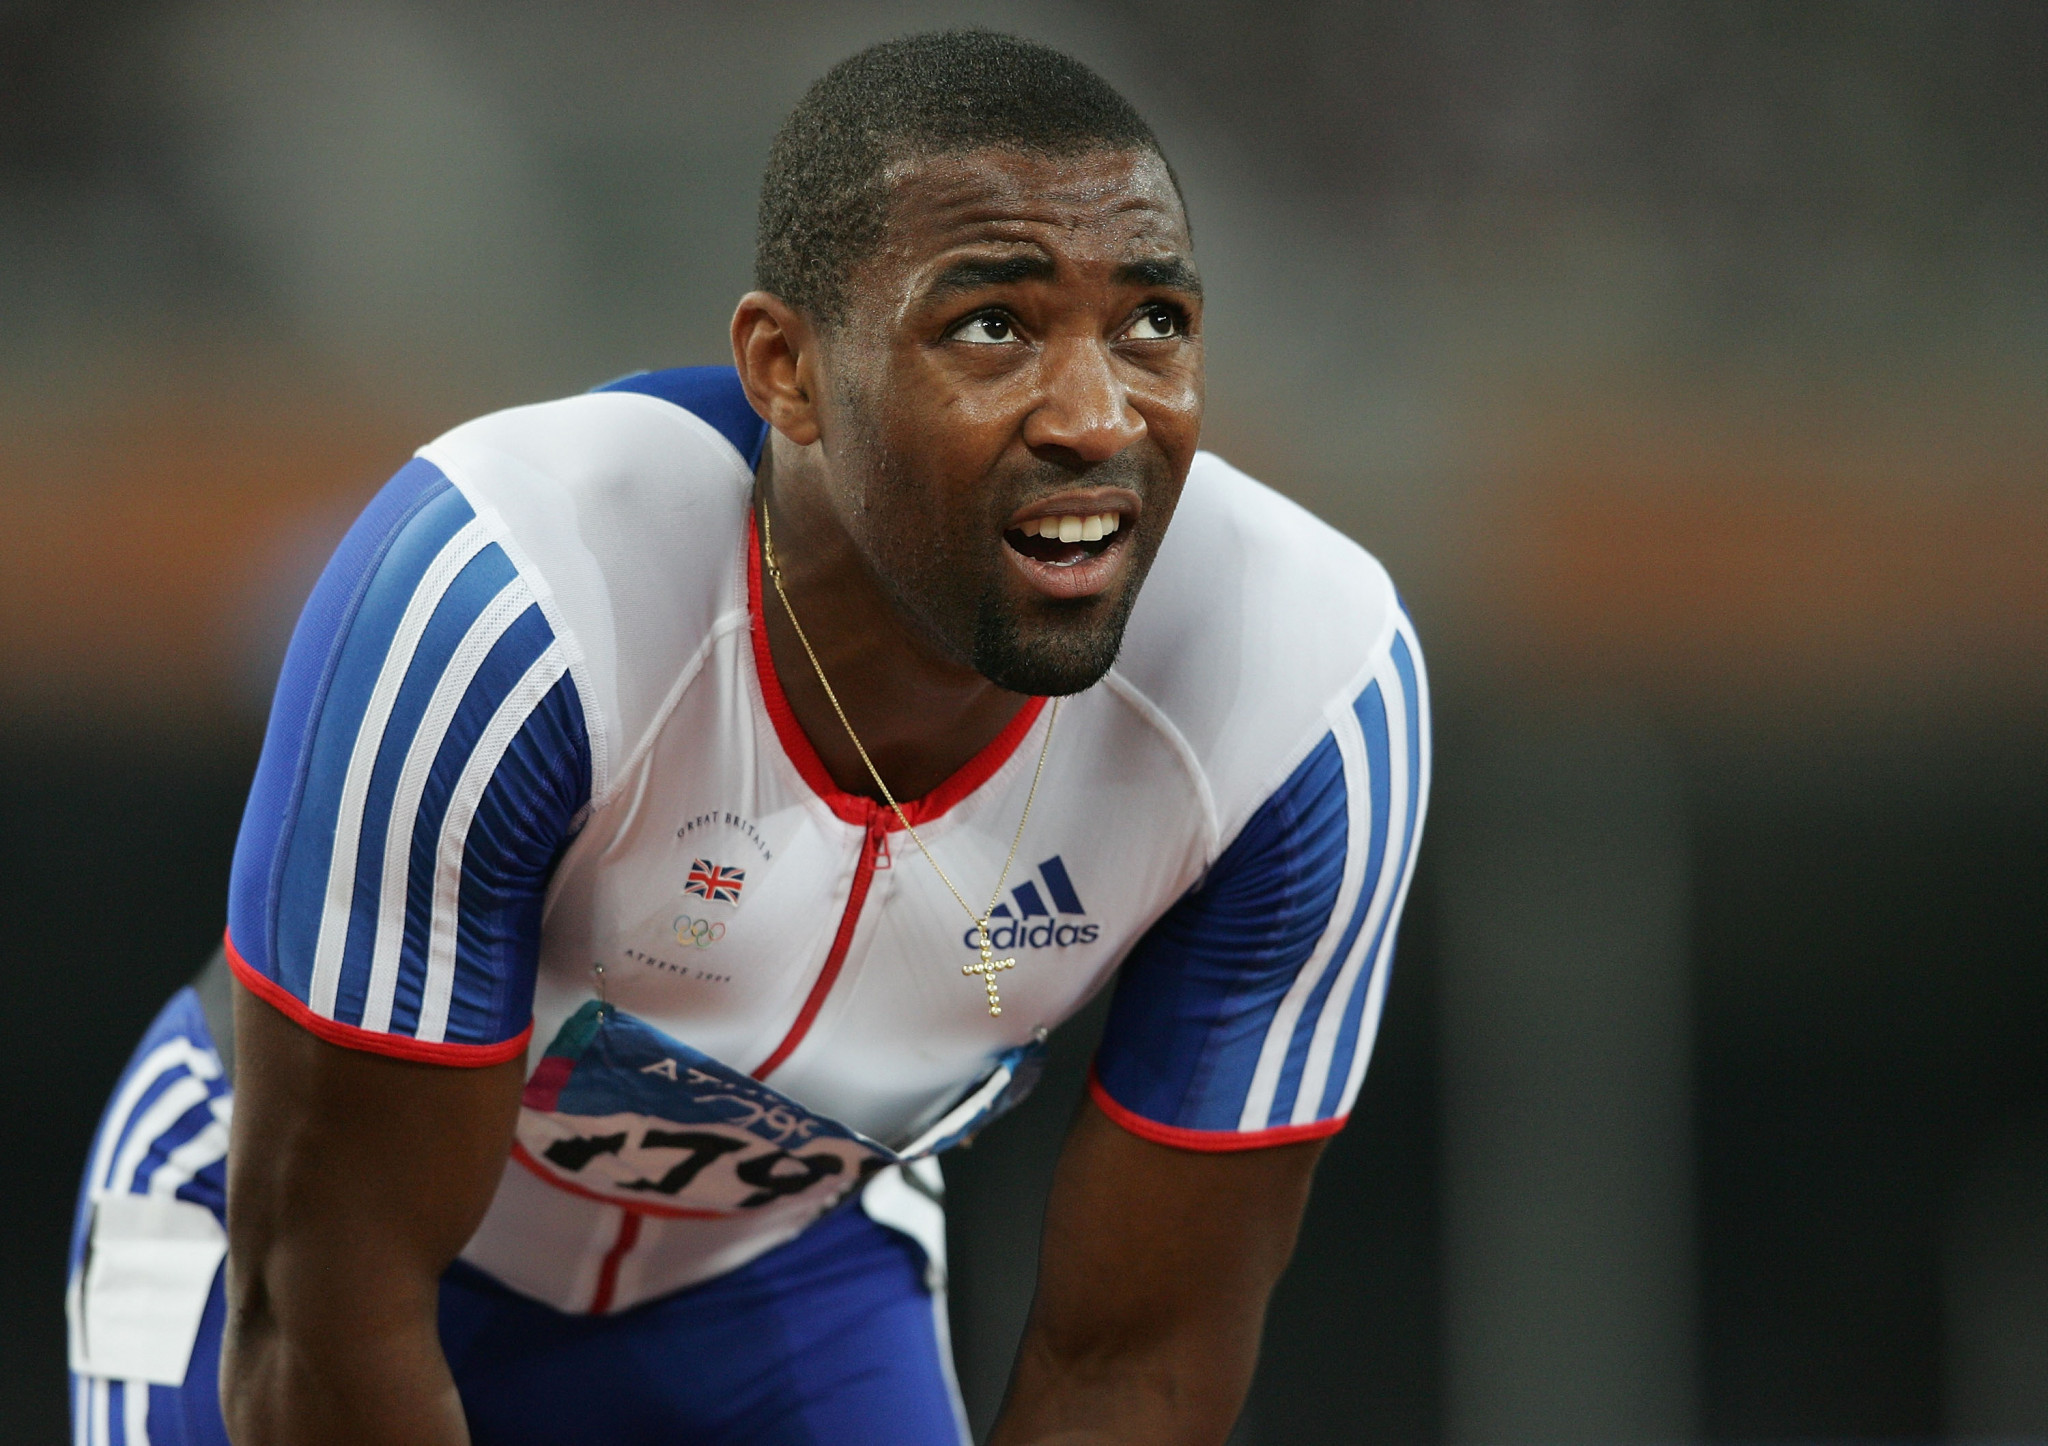 Olympic champion Campbell to oversee UK sprint relay team for Tokyo 2020